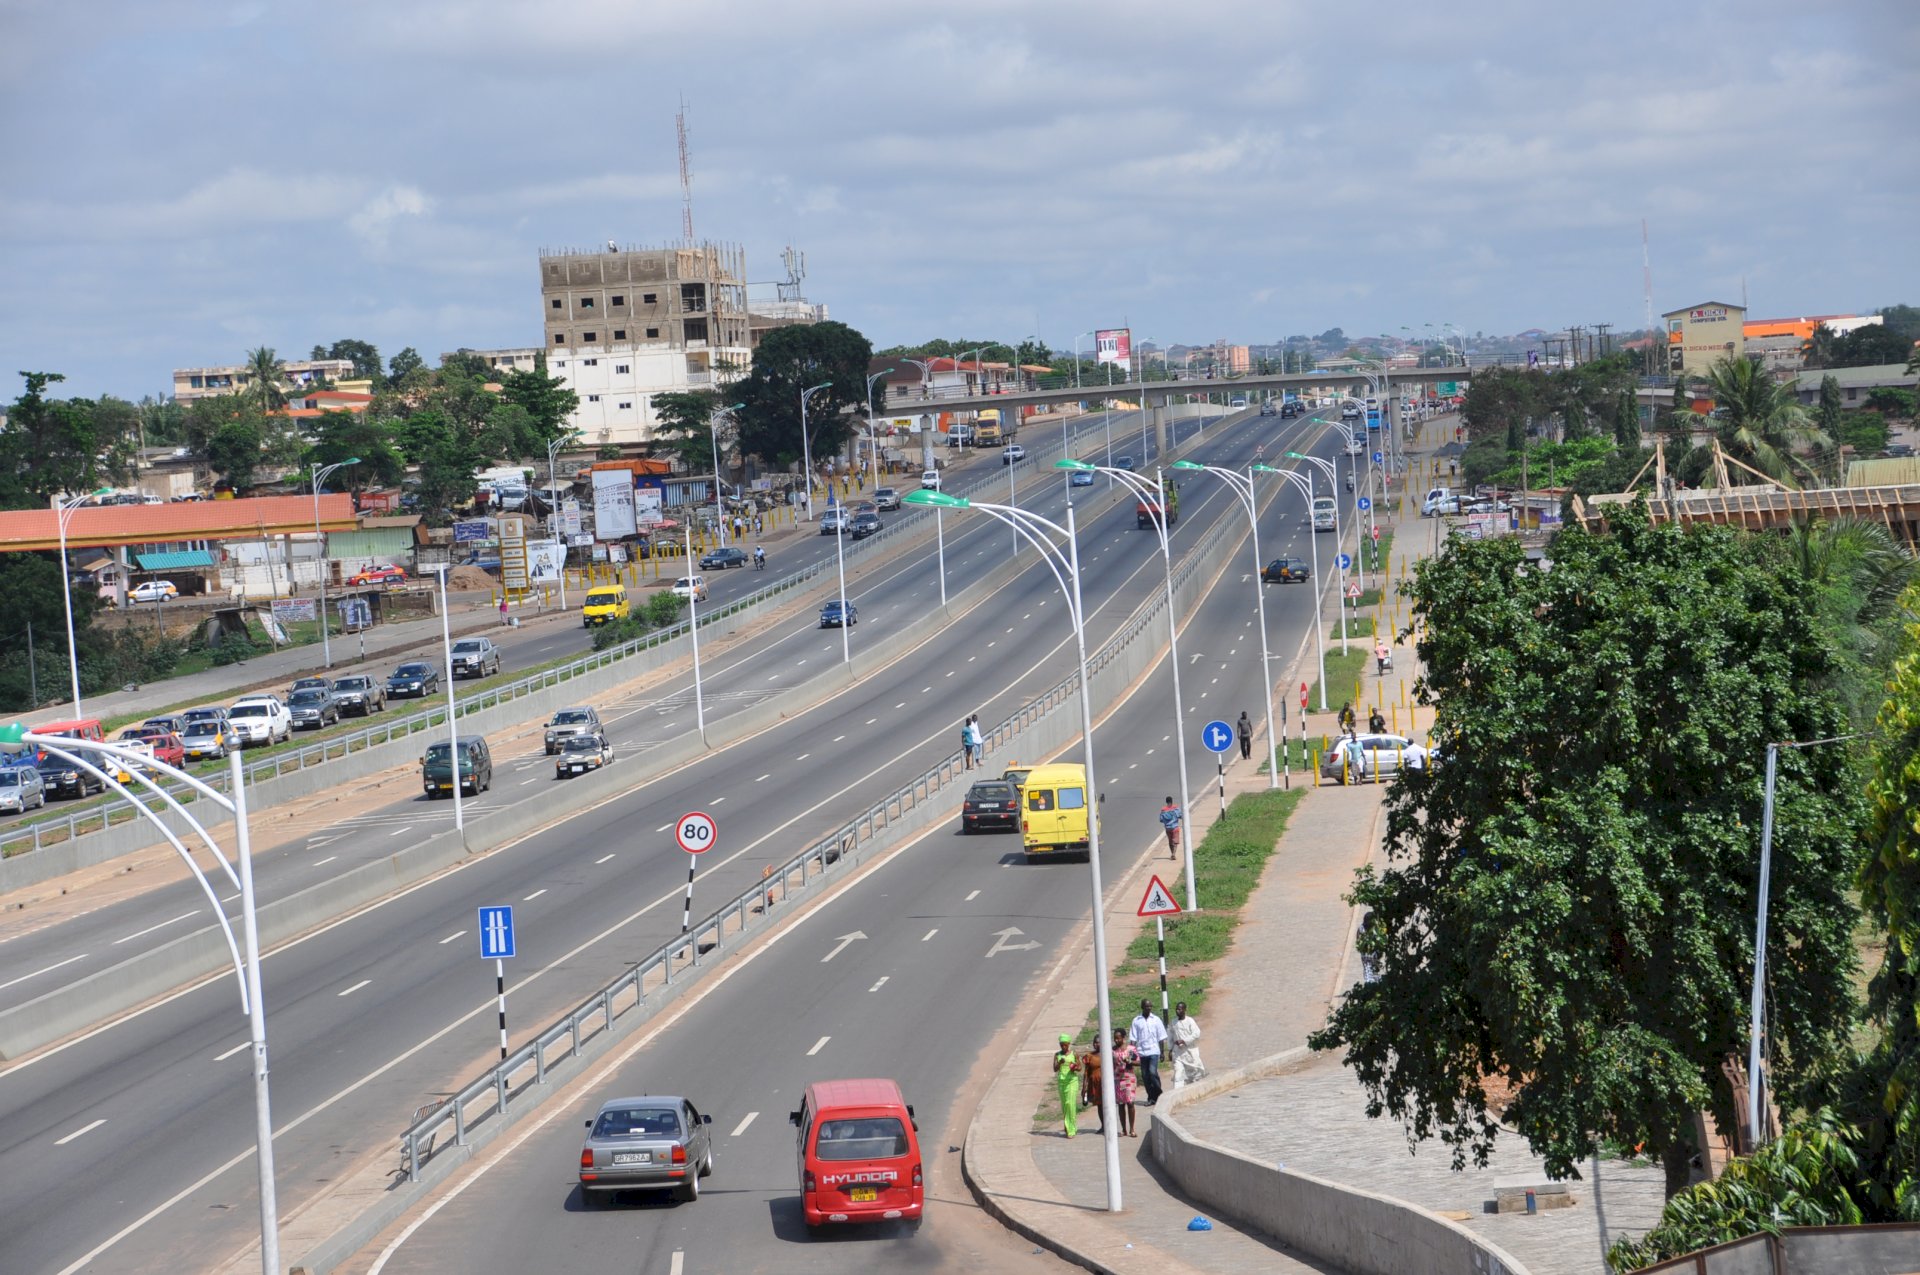 Accra street or road